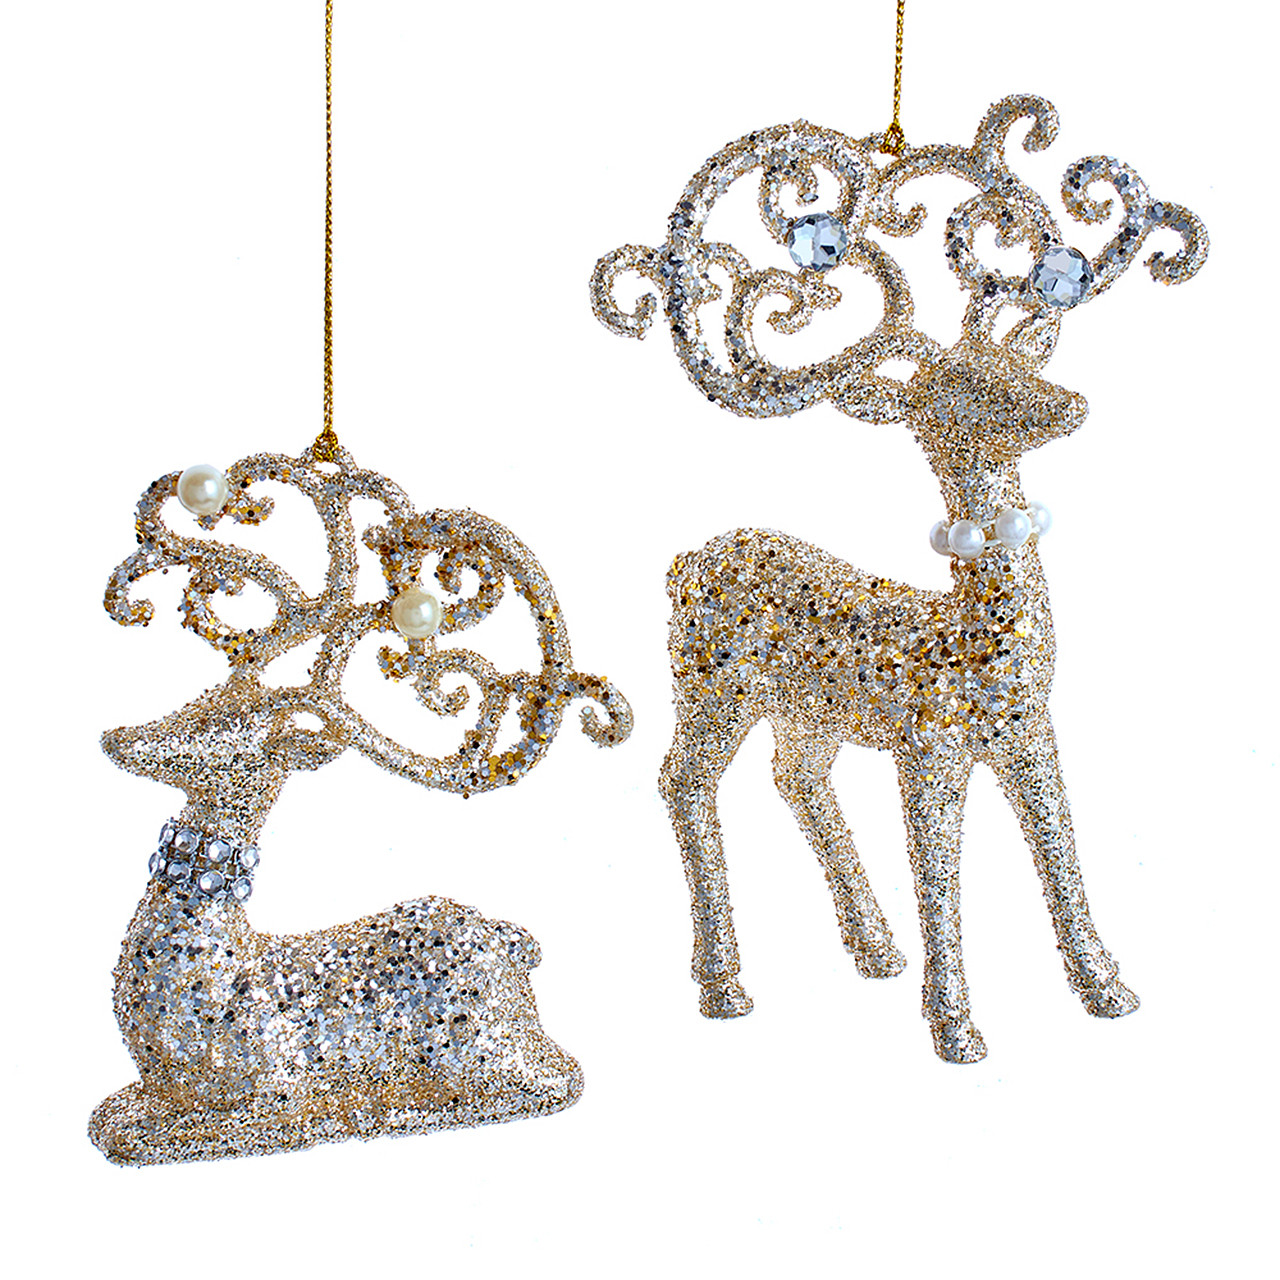 In-Store Only - 5.7 in. Platinum Deer Ornaments, Set of 2 